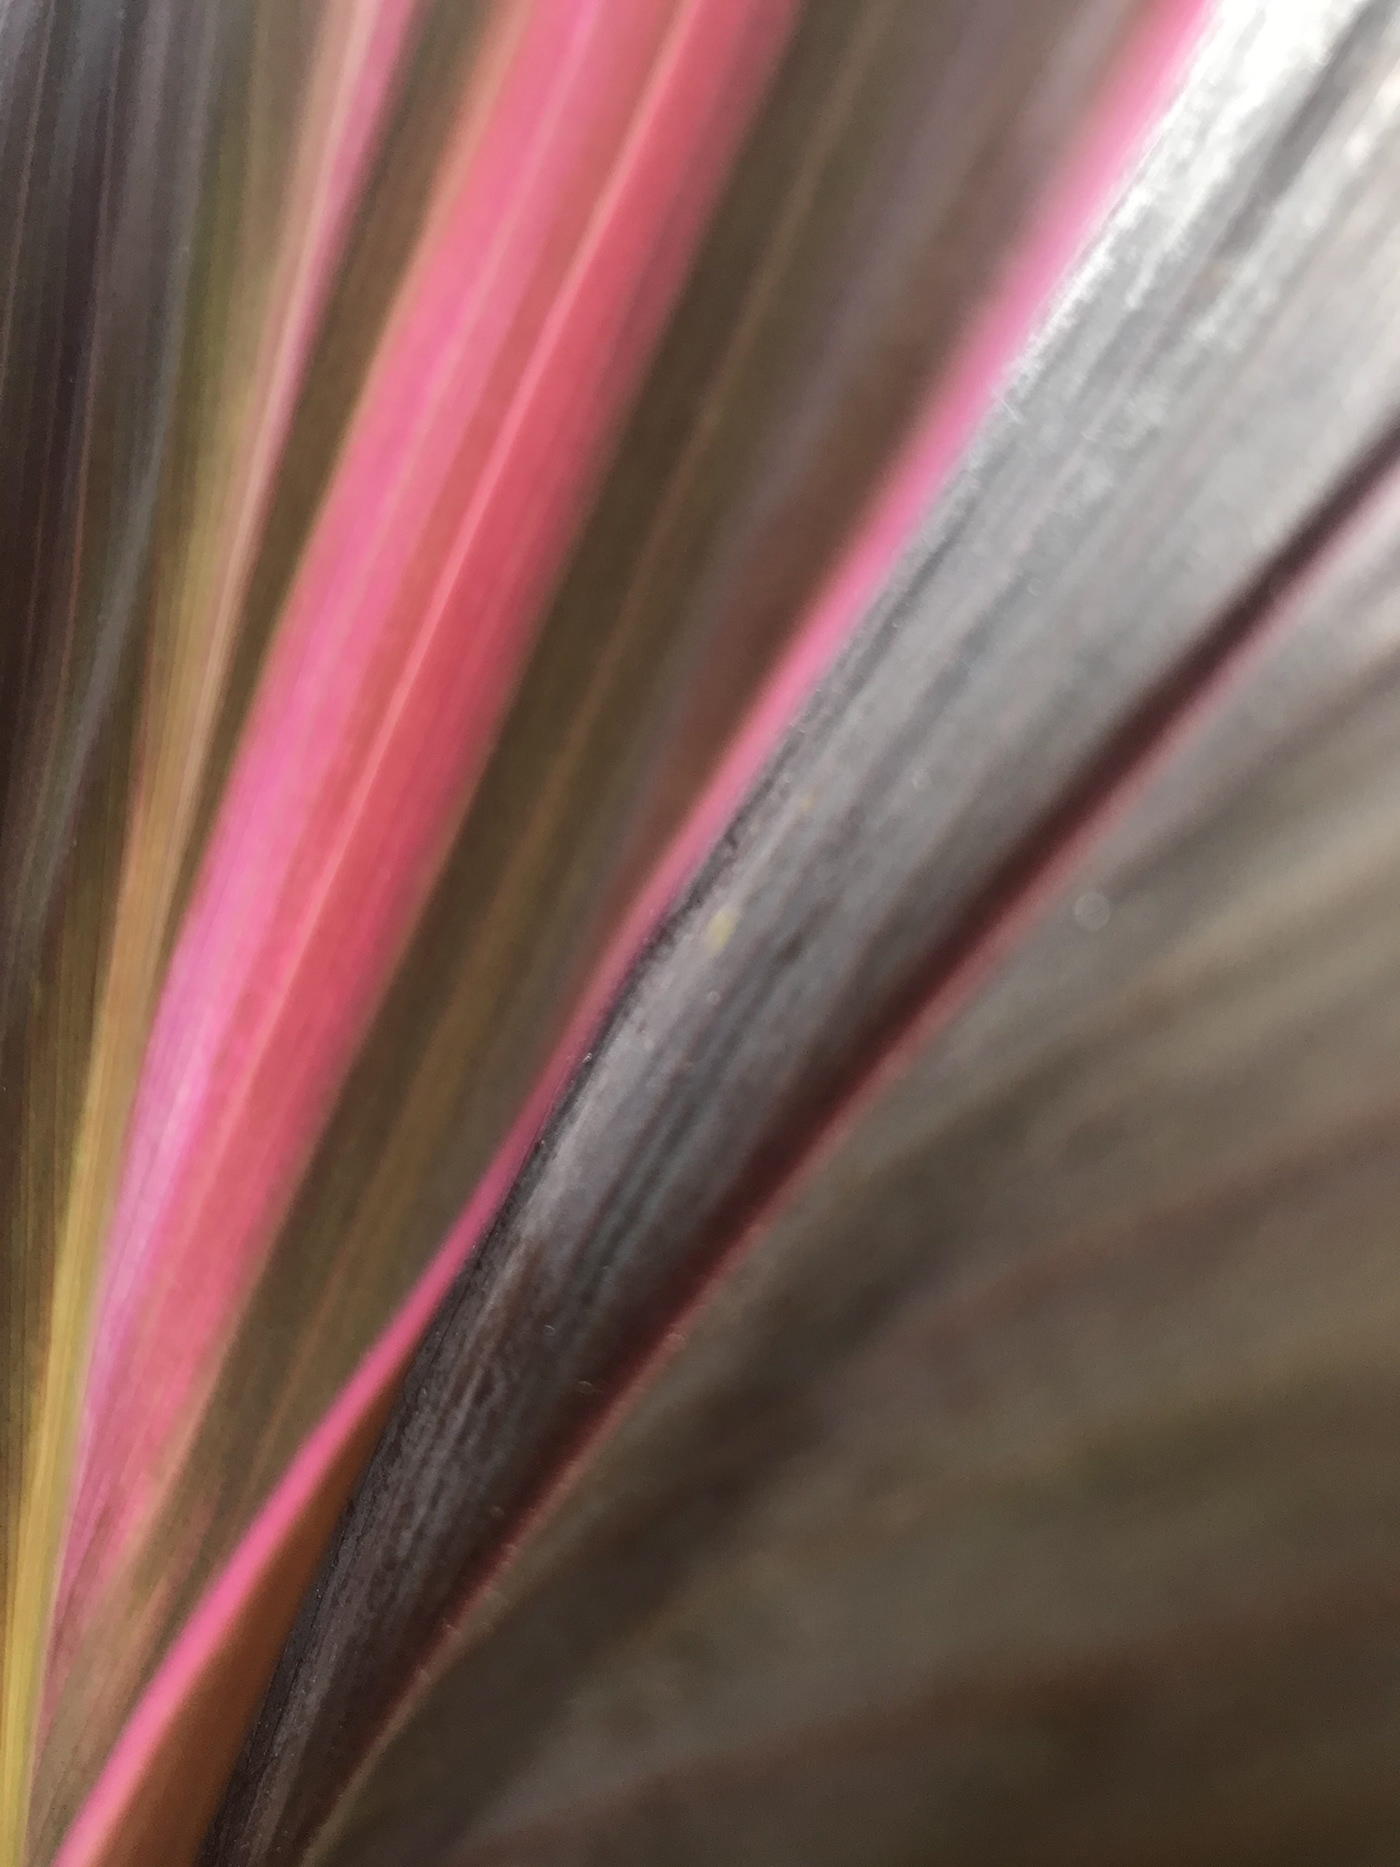 Abstract photography with brown, pink beige and gray tilted lines that converge to the left bottom.